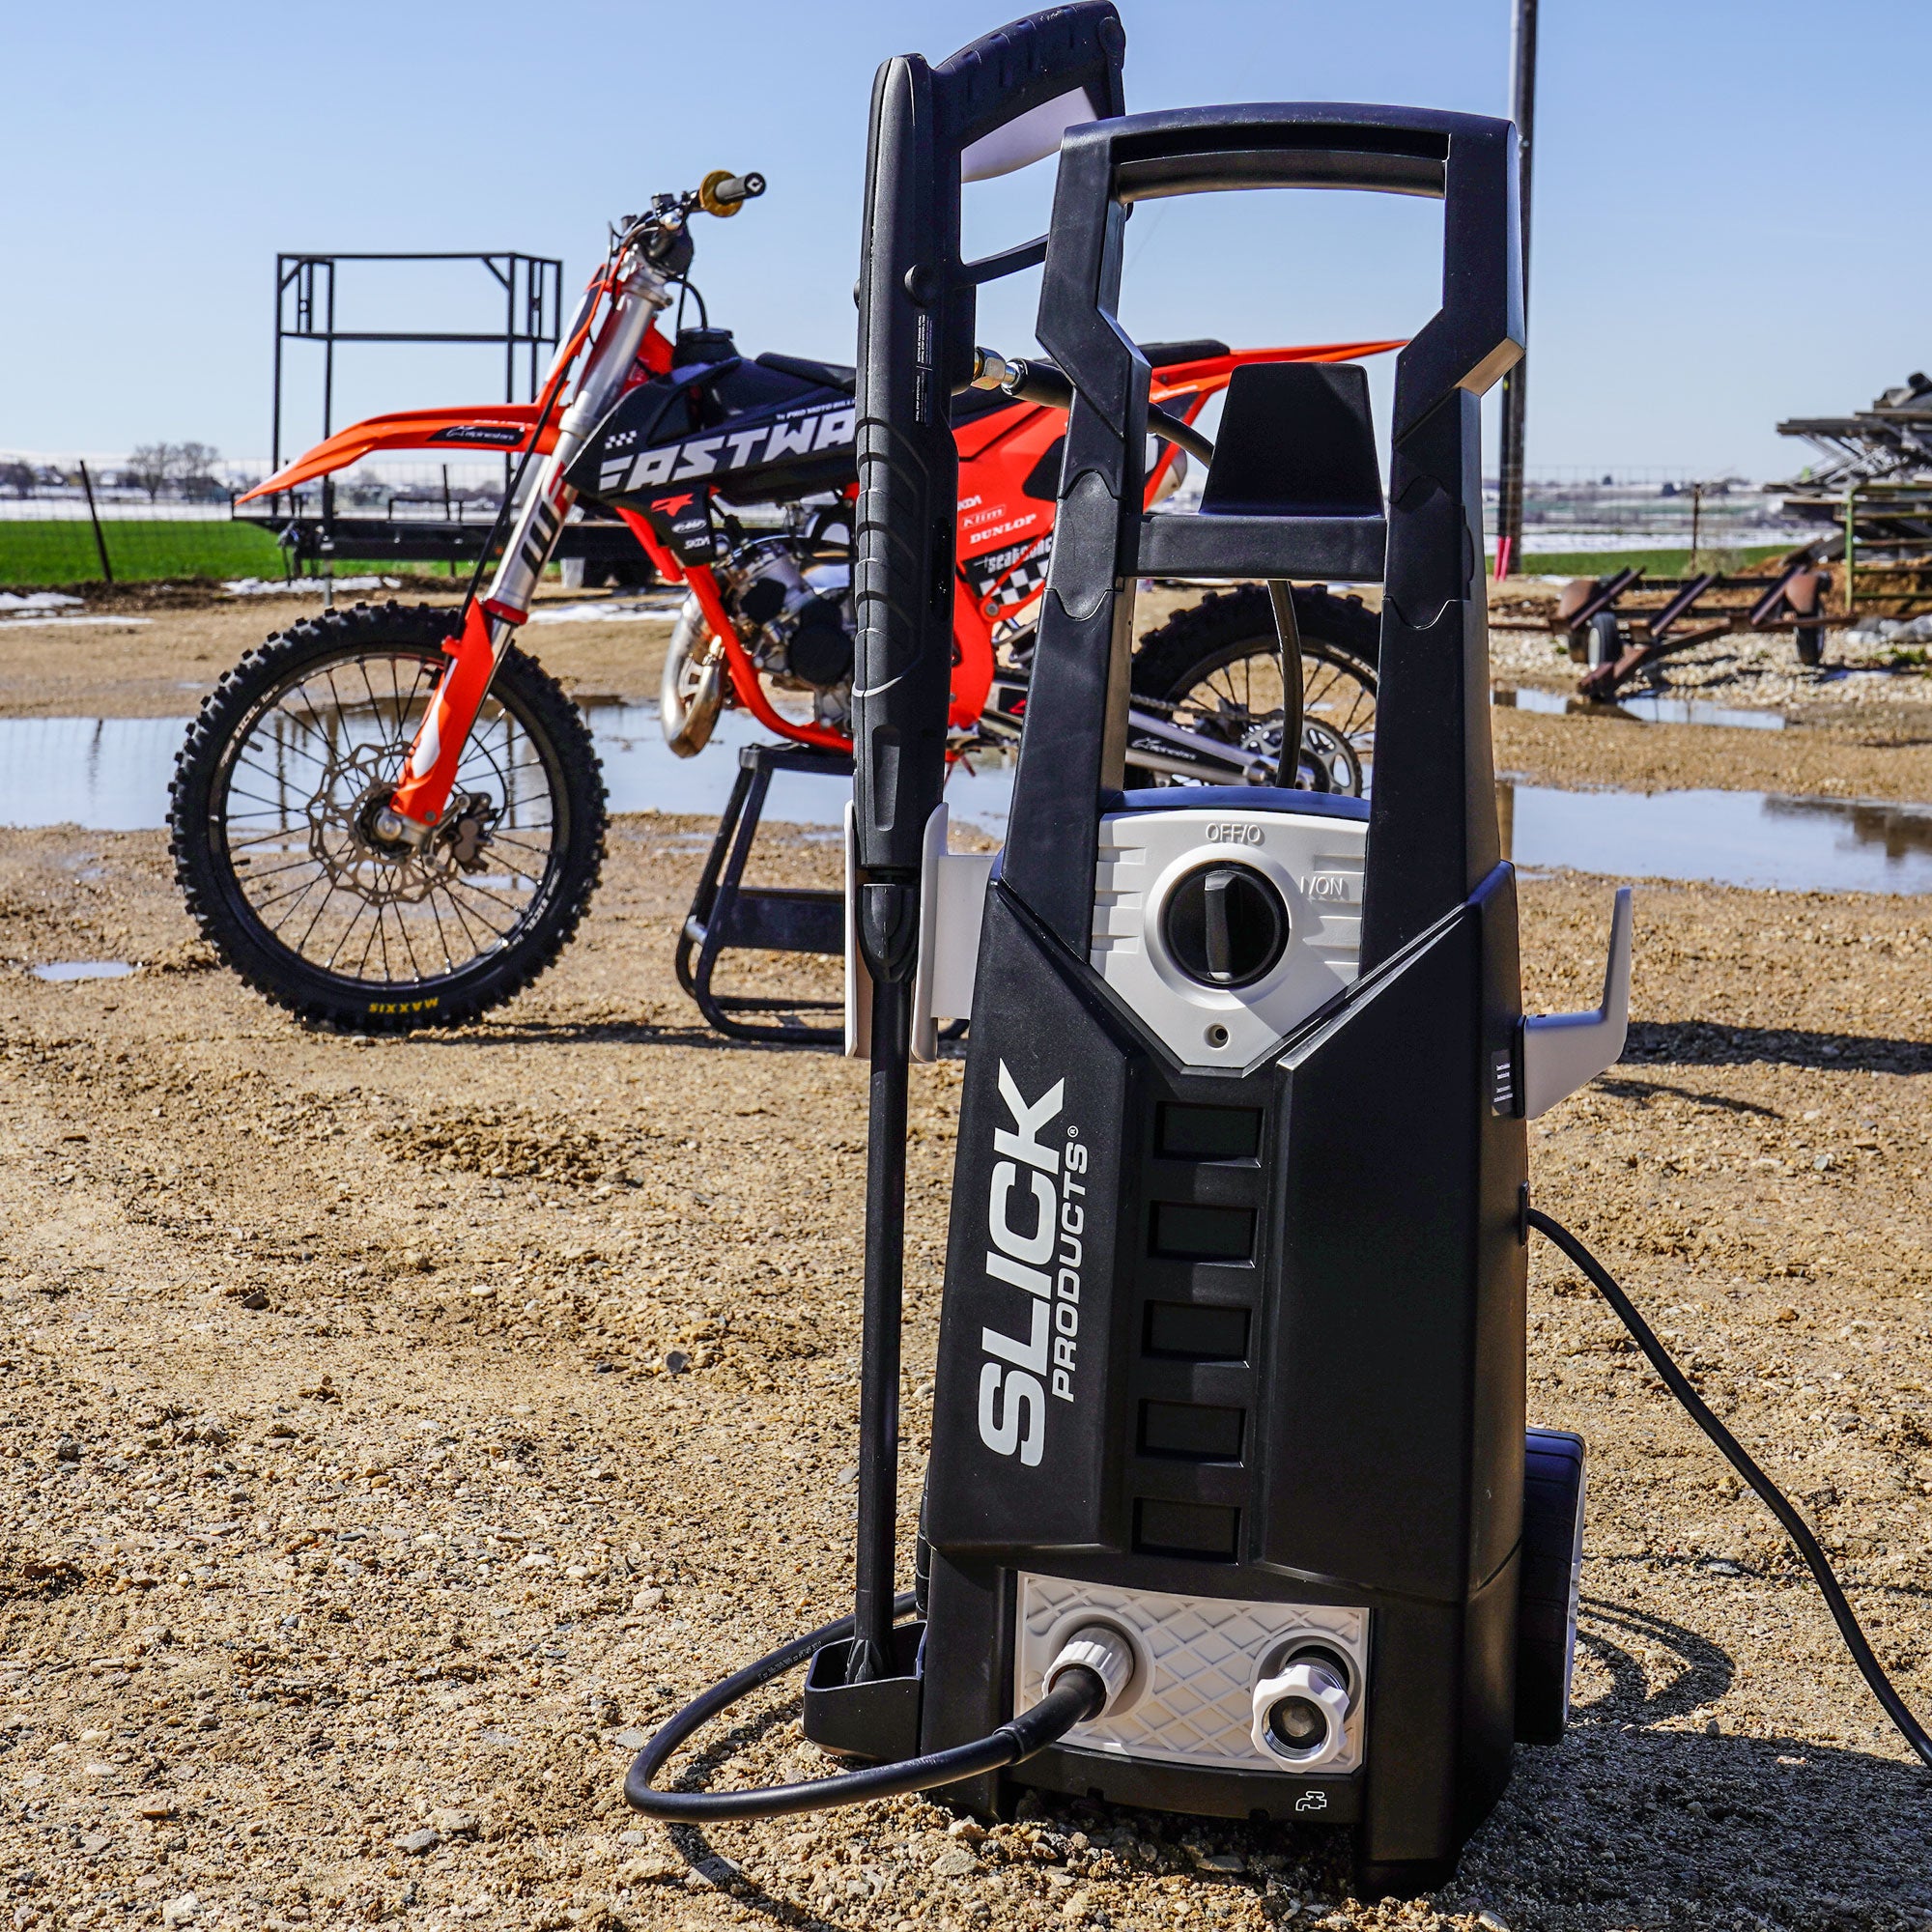 2050-PSI High Performance Electric Pressure Washer